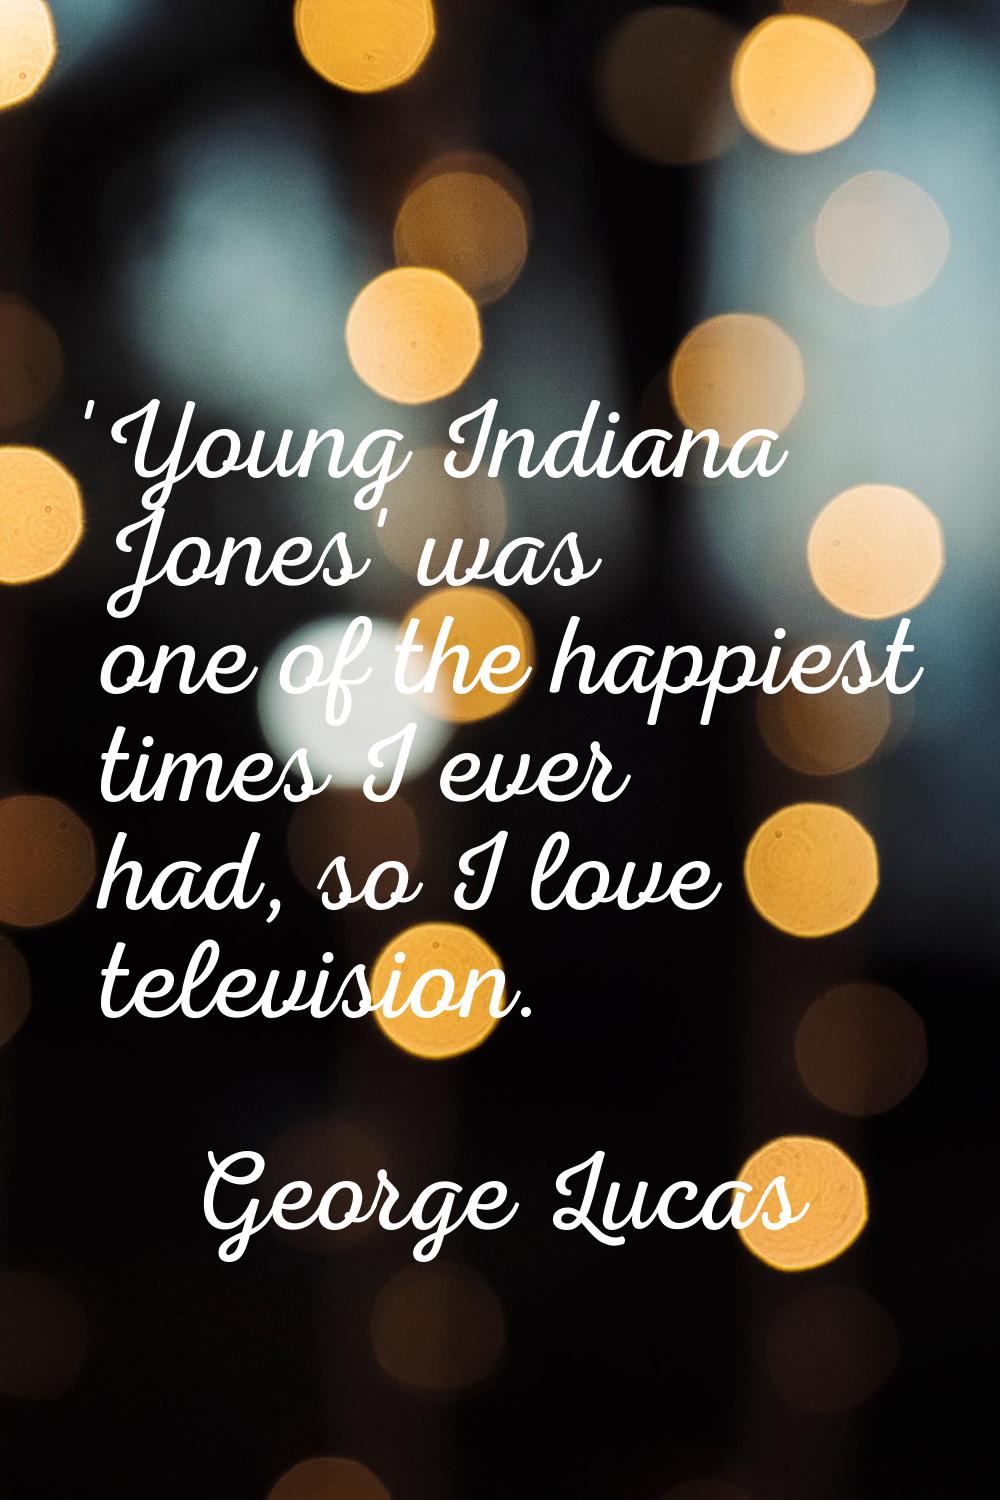 'Young Indiana Jones' was one of the happiest times I ever had, so I love television.